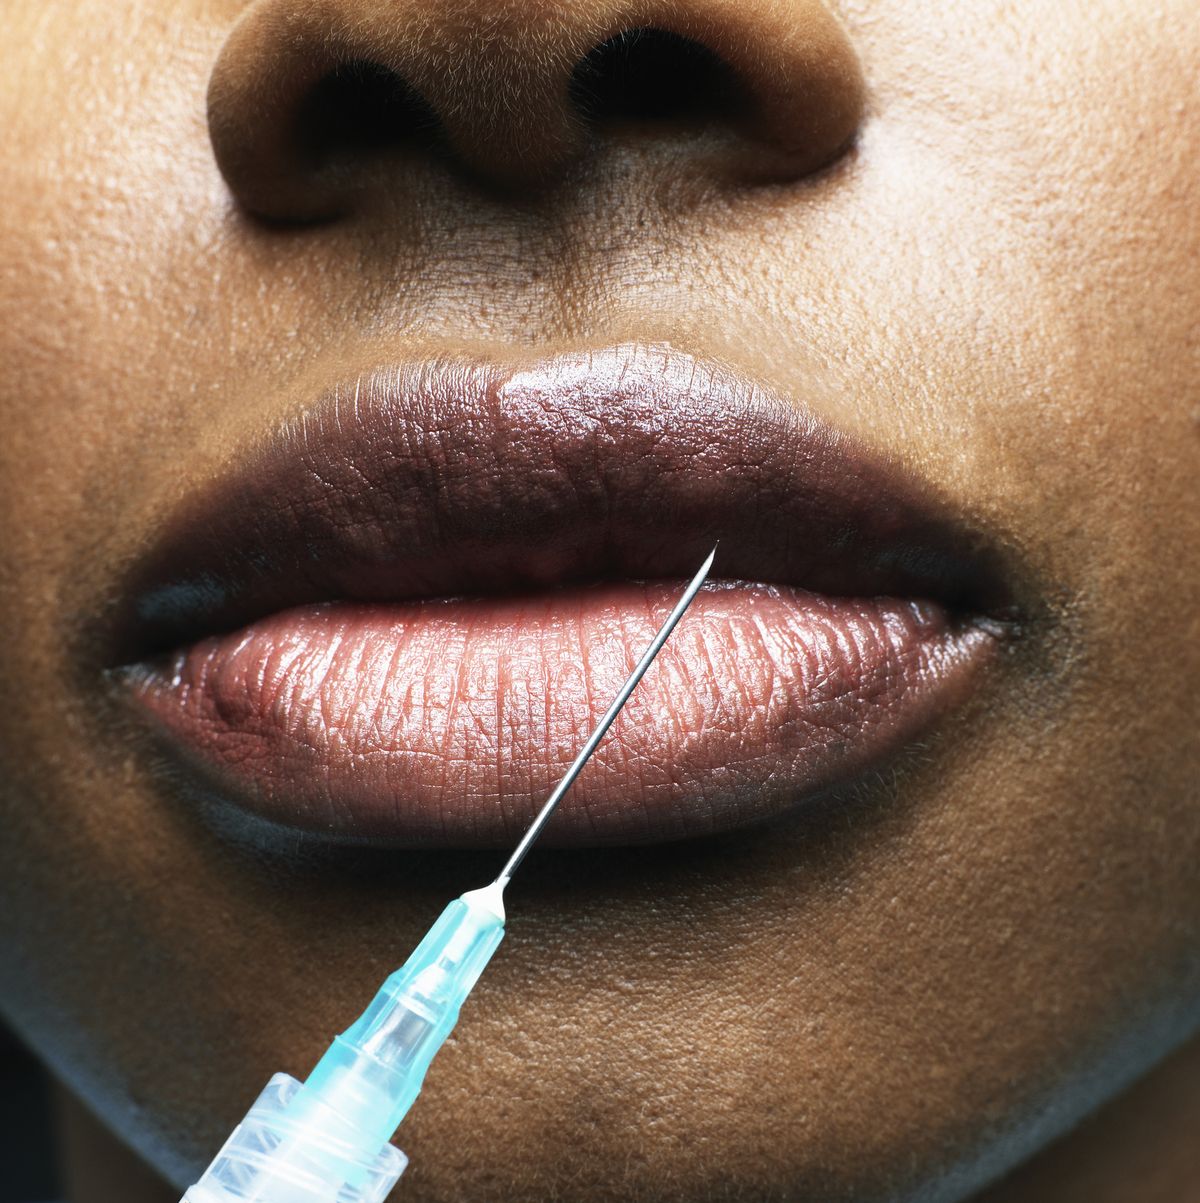 Lip filler: Why over-inflated lips are finally out